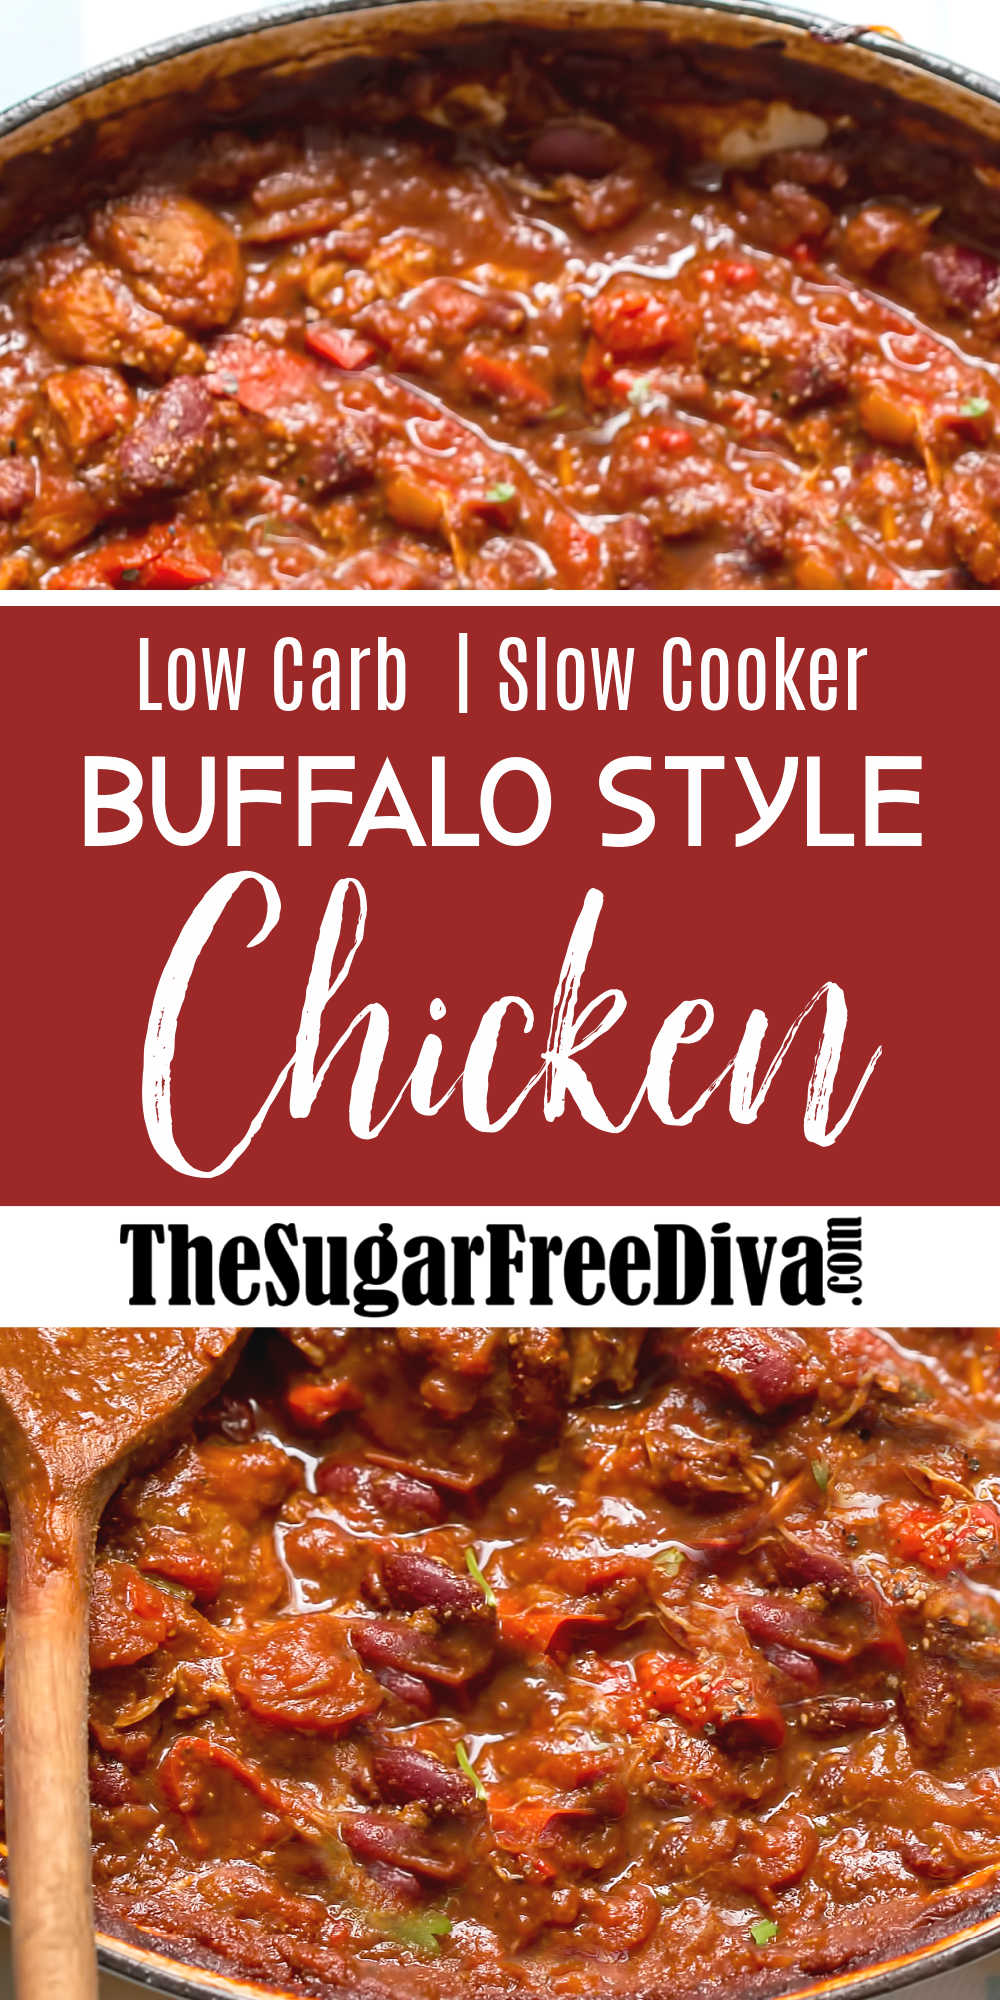 Low Carb Slow Cooker Buffalo Chicken